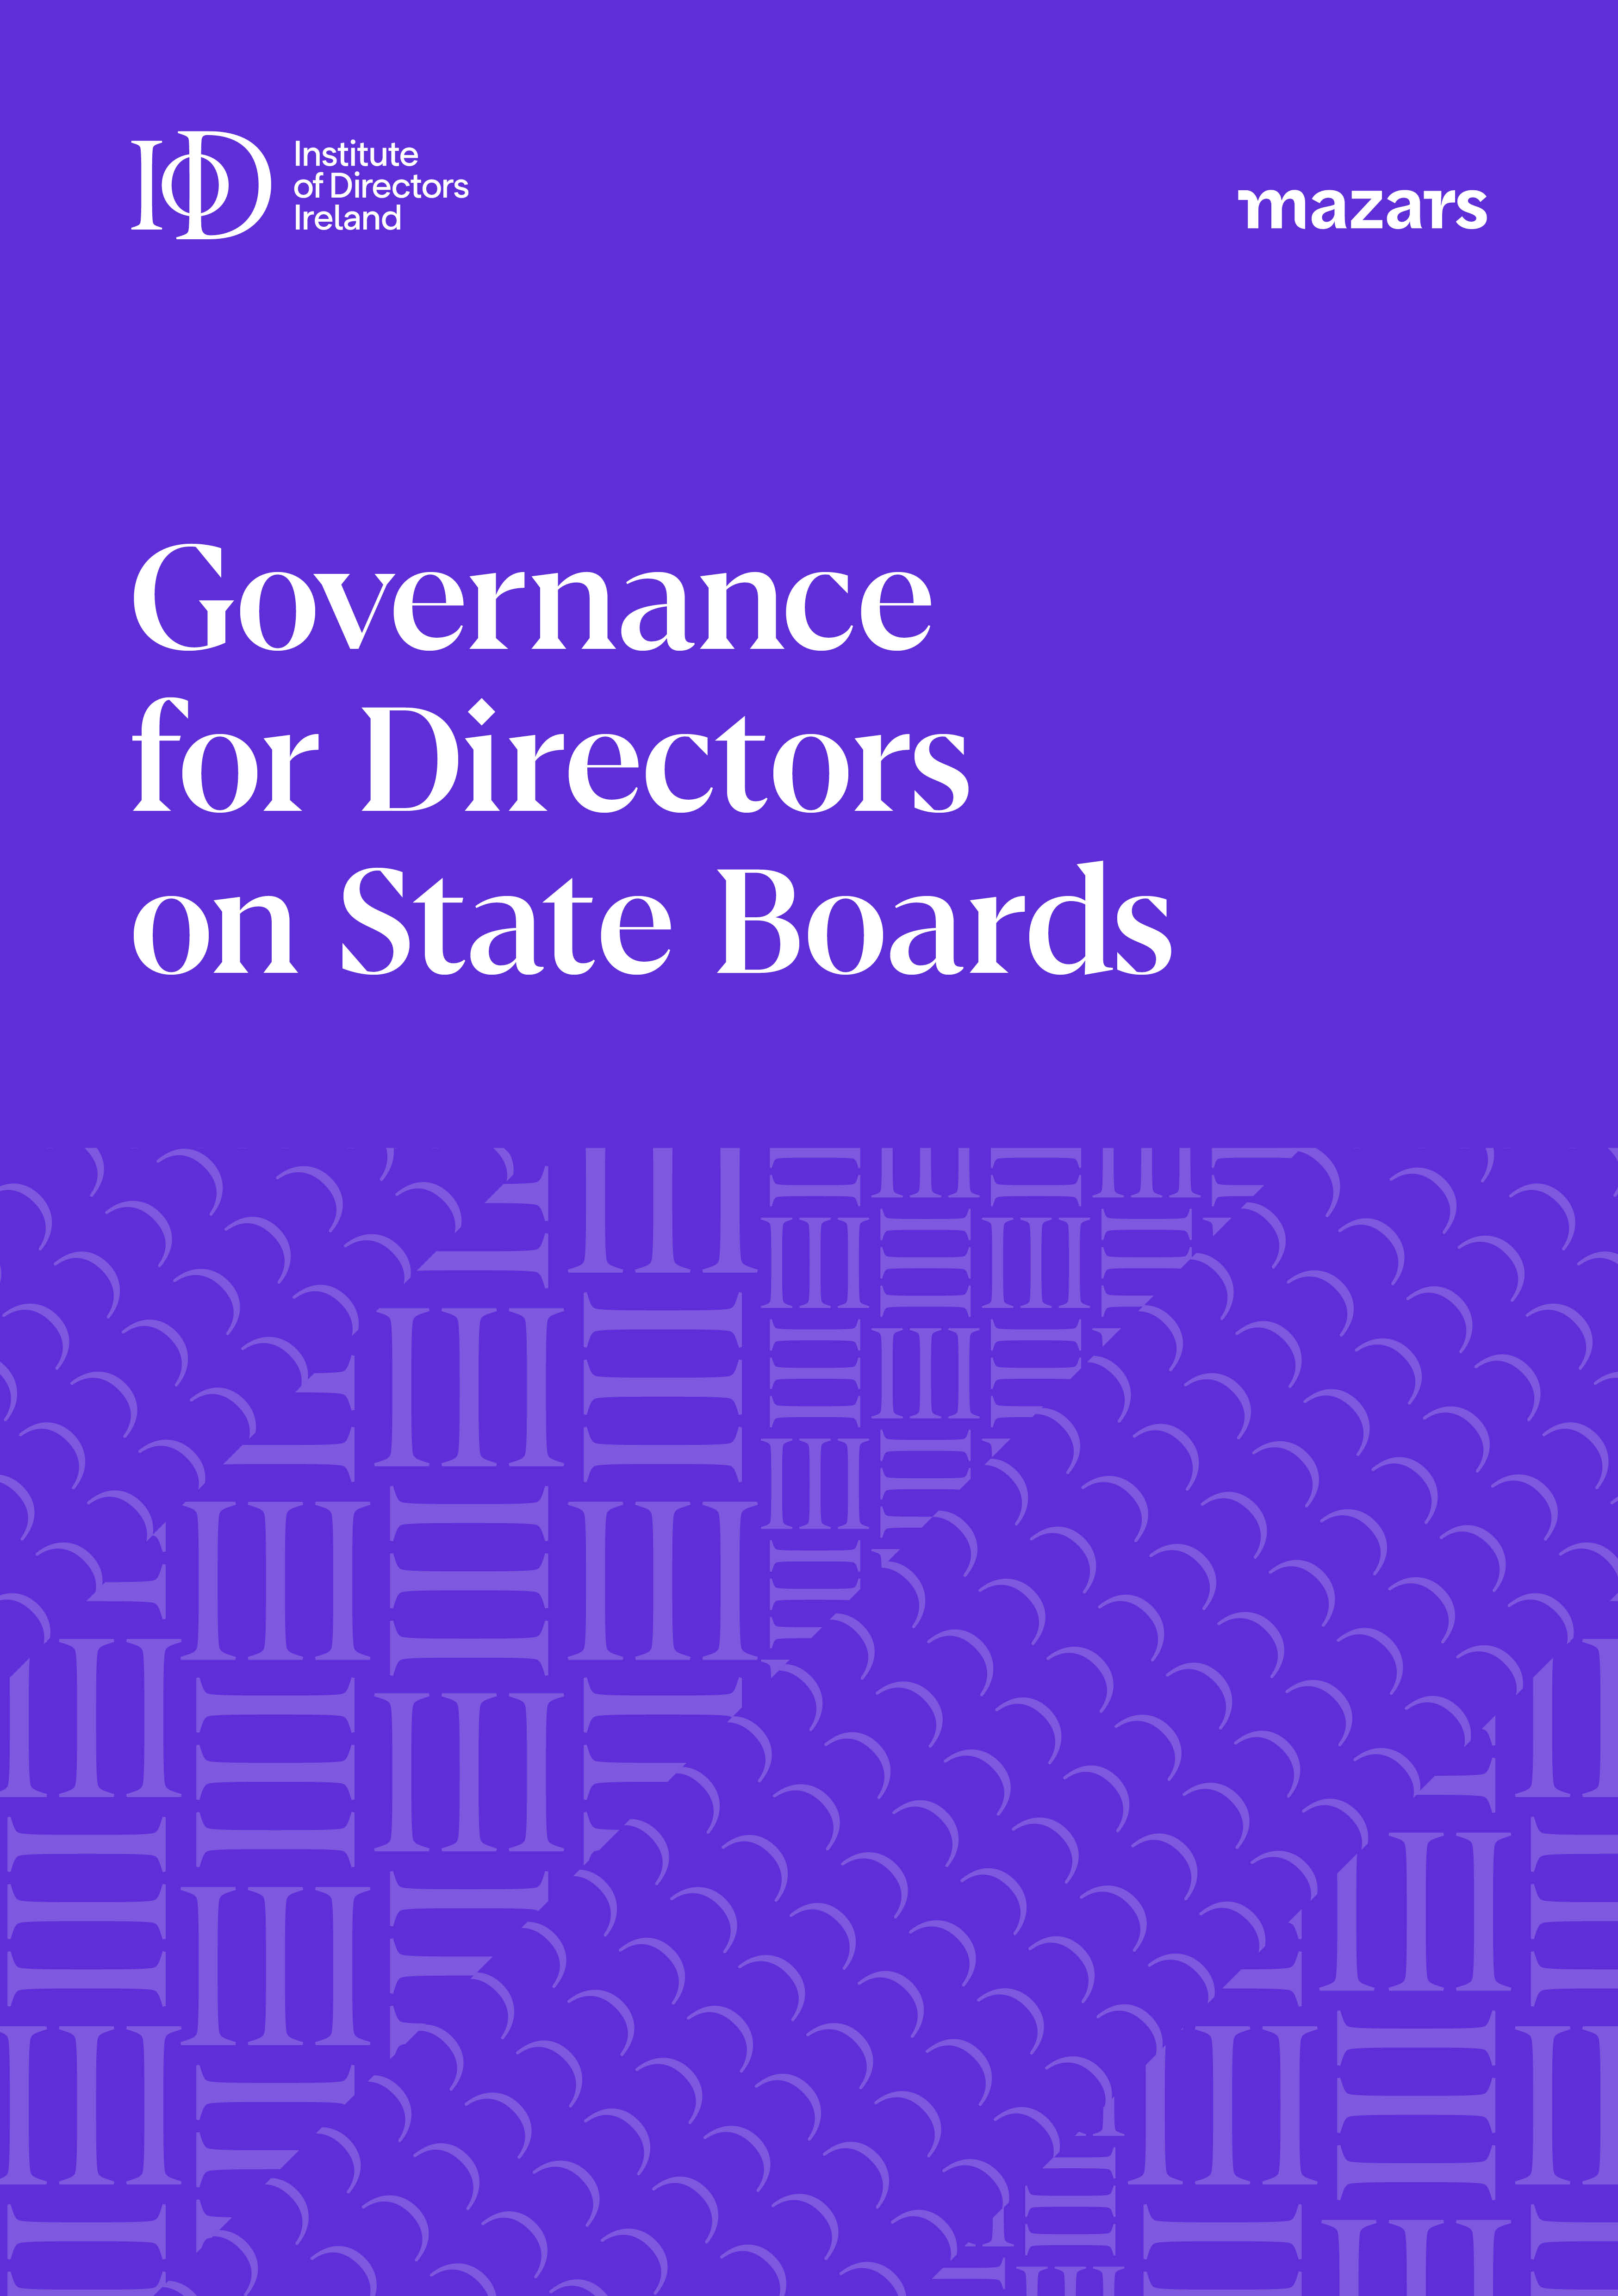 Governance for Directors on State Boards